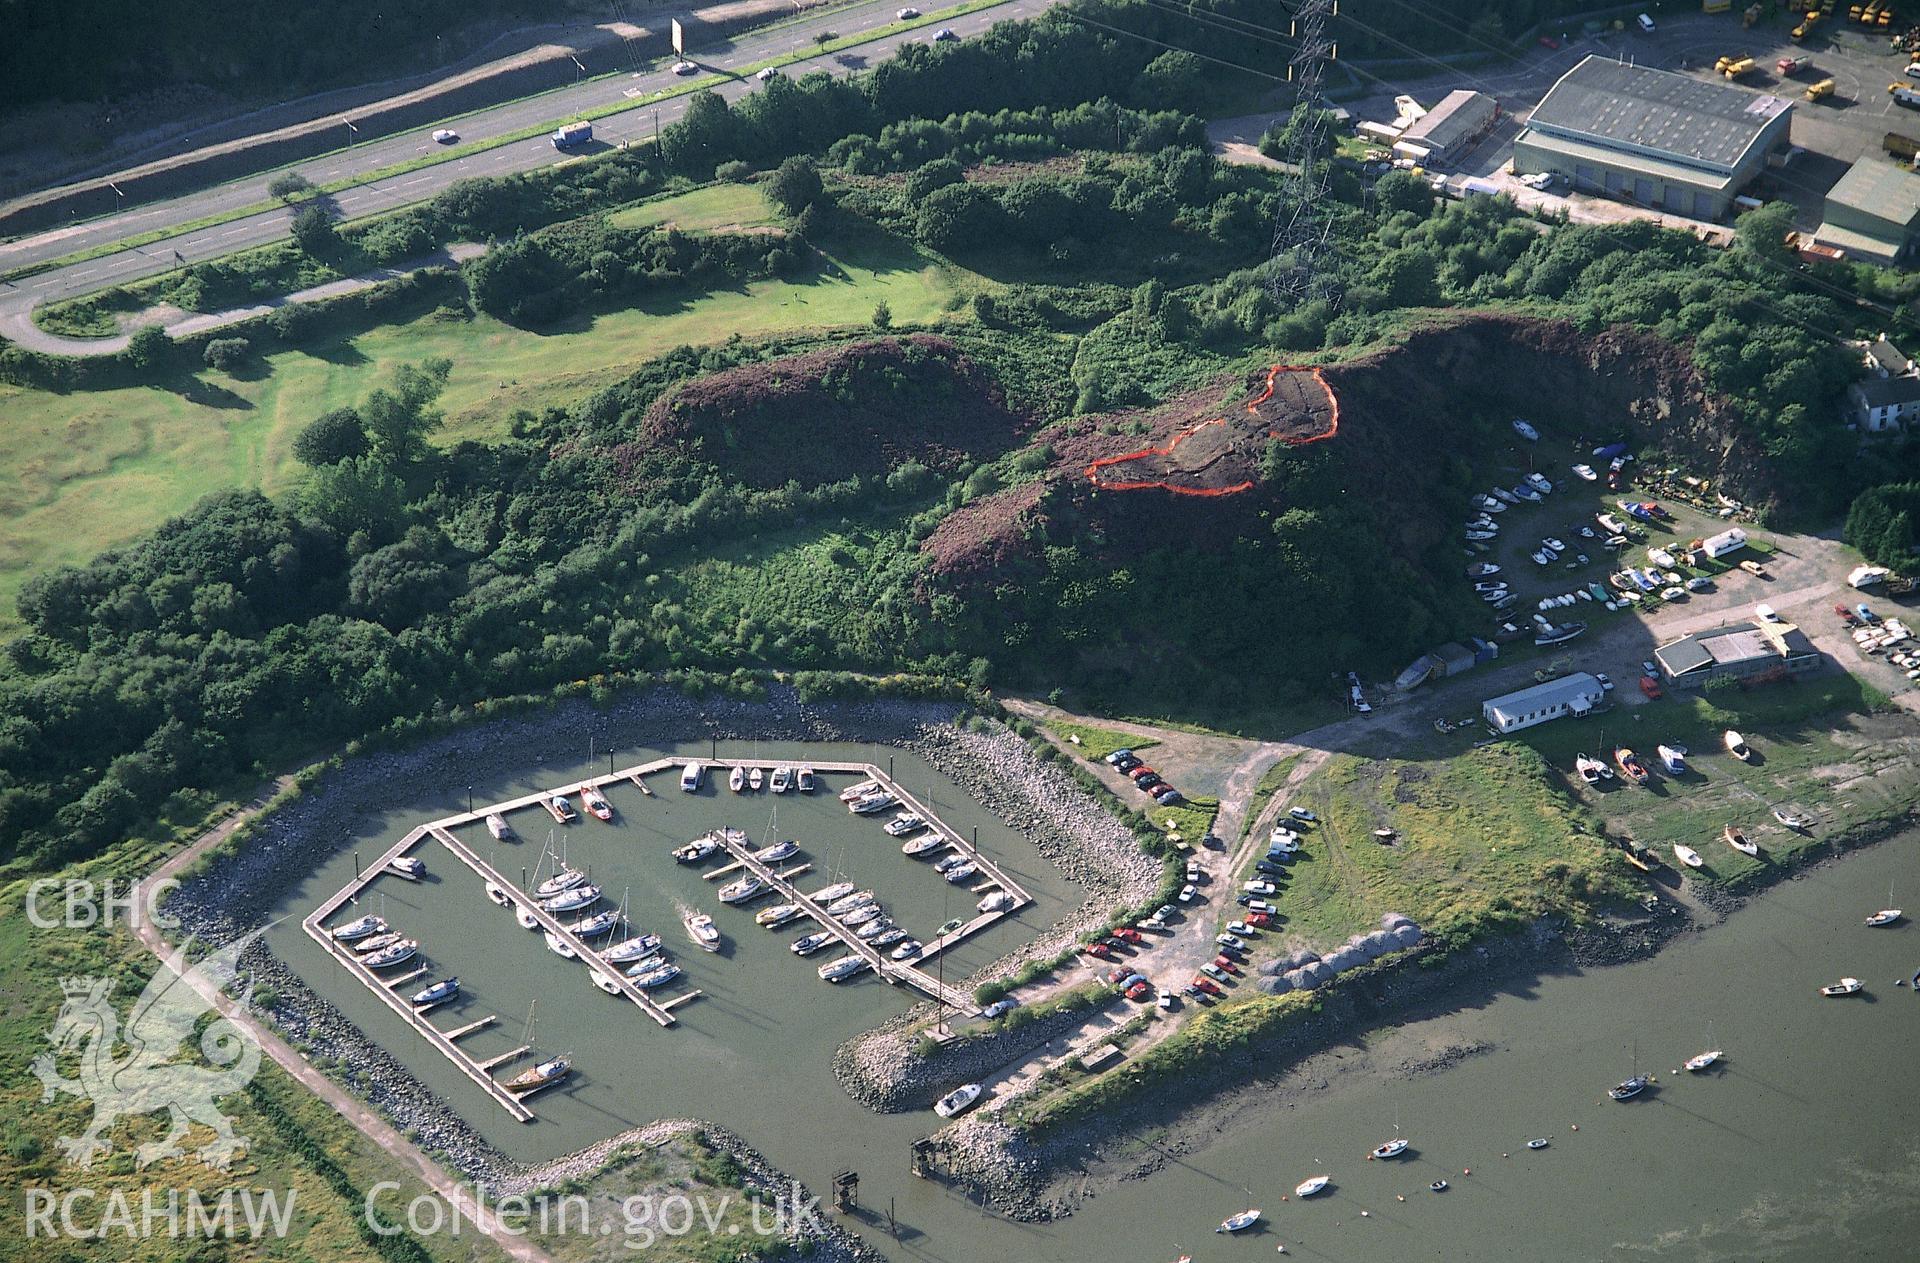 RCAHMW colour slide oblique aerial photograph of Hen Gastell, Coedffranc, taken on 25/08/1991 by CR Musson